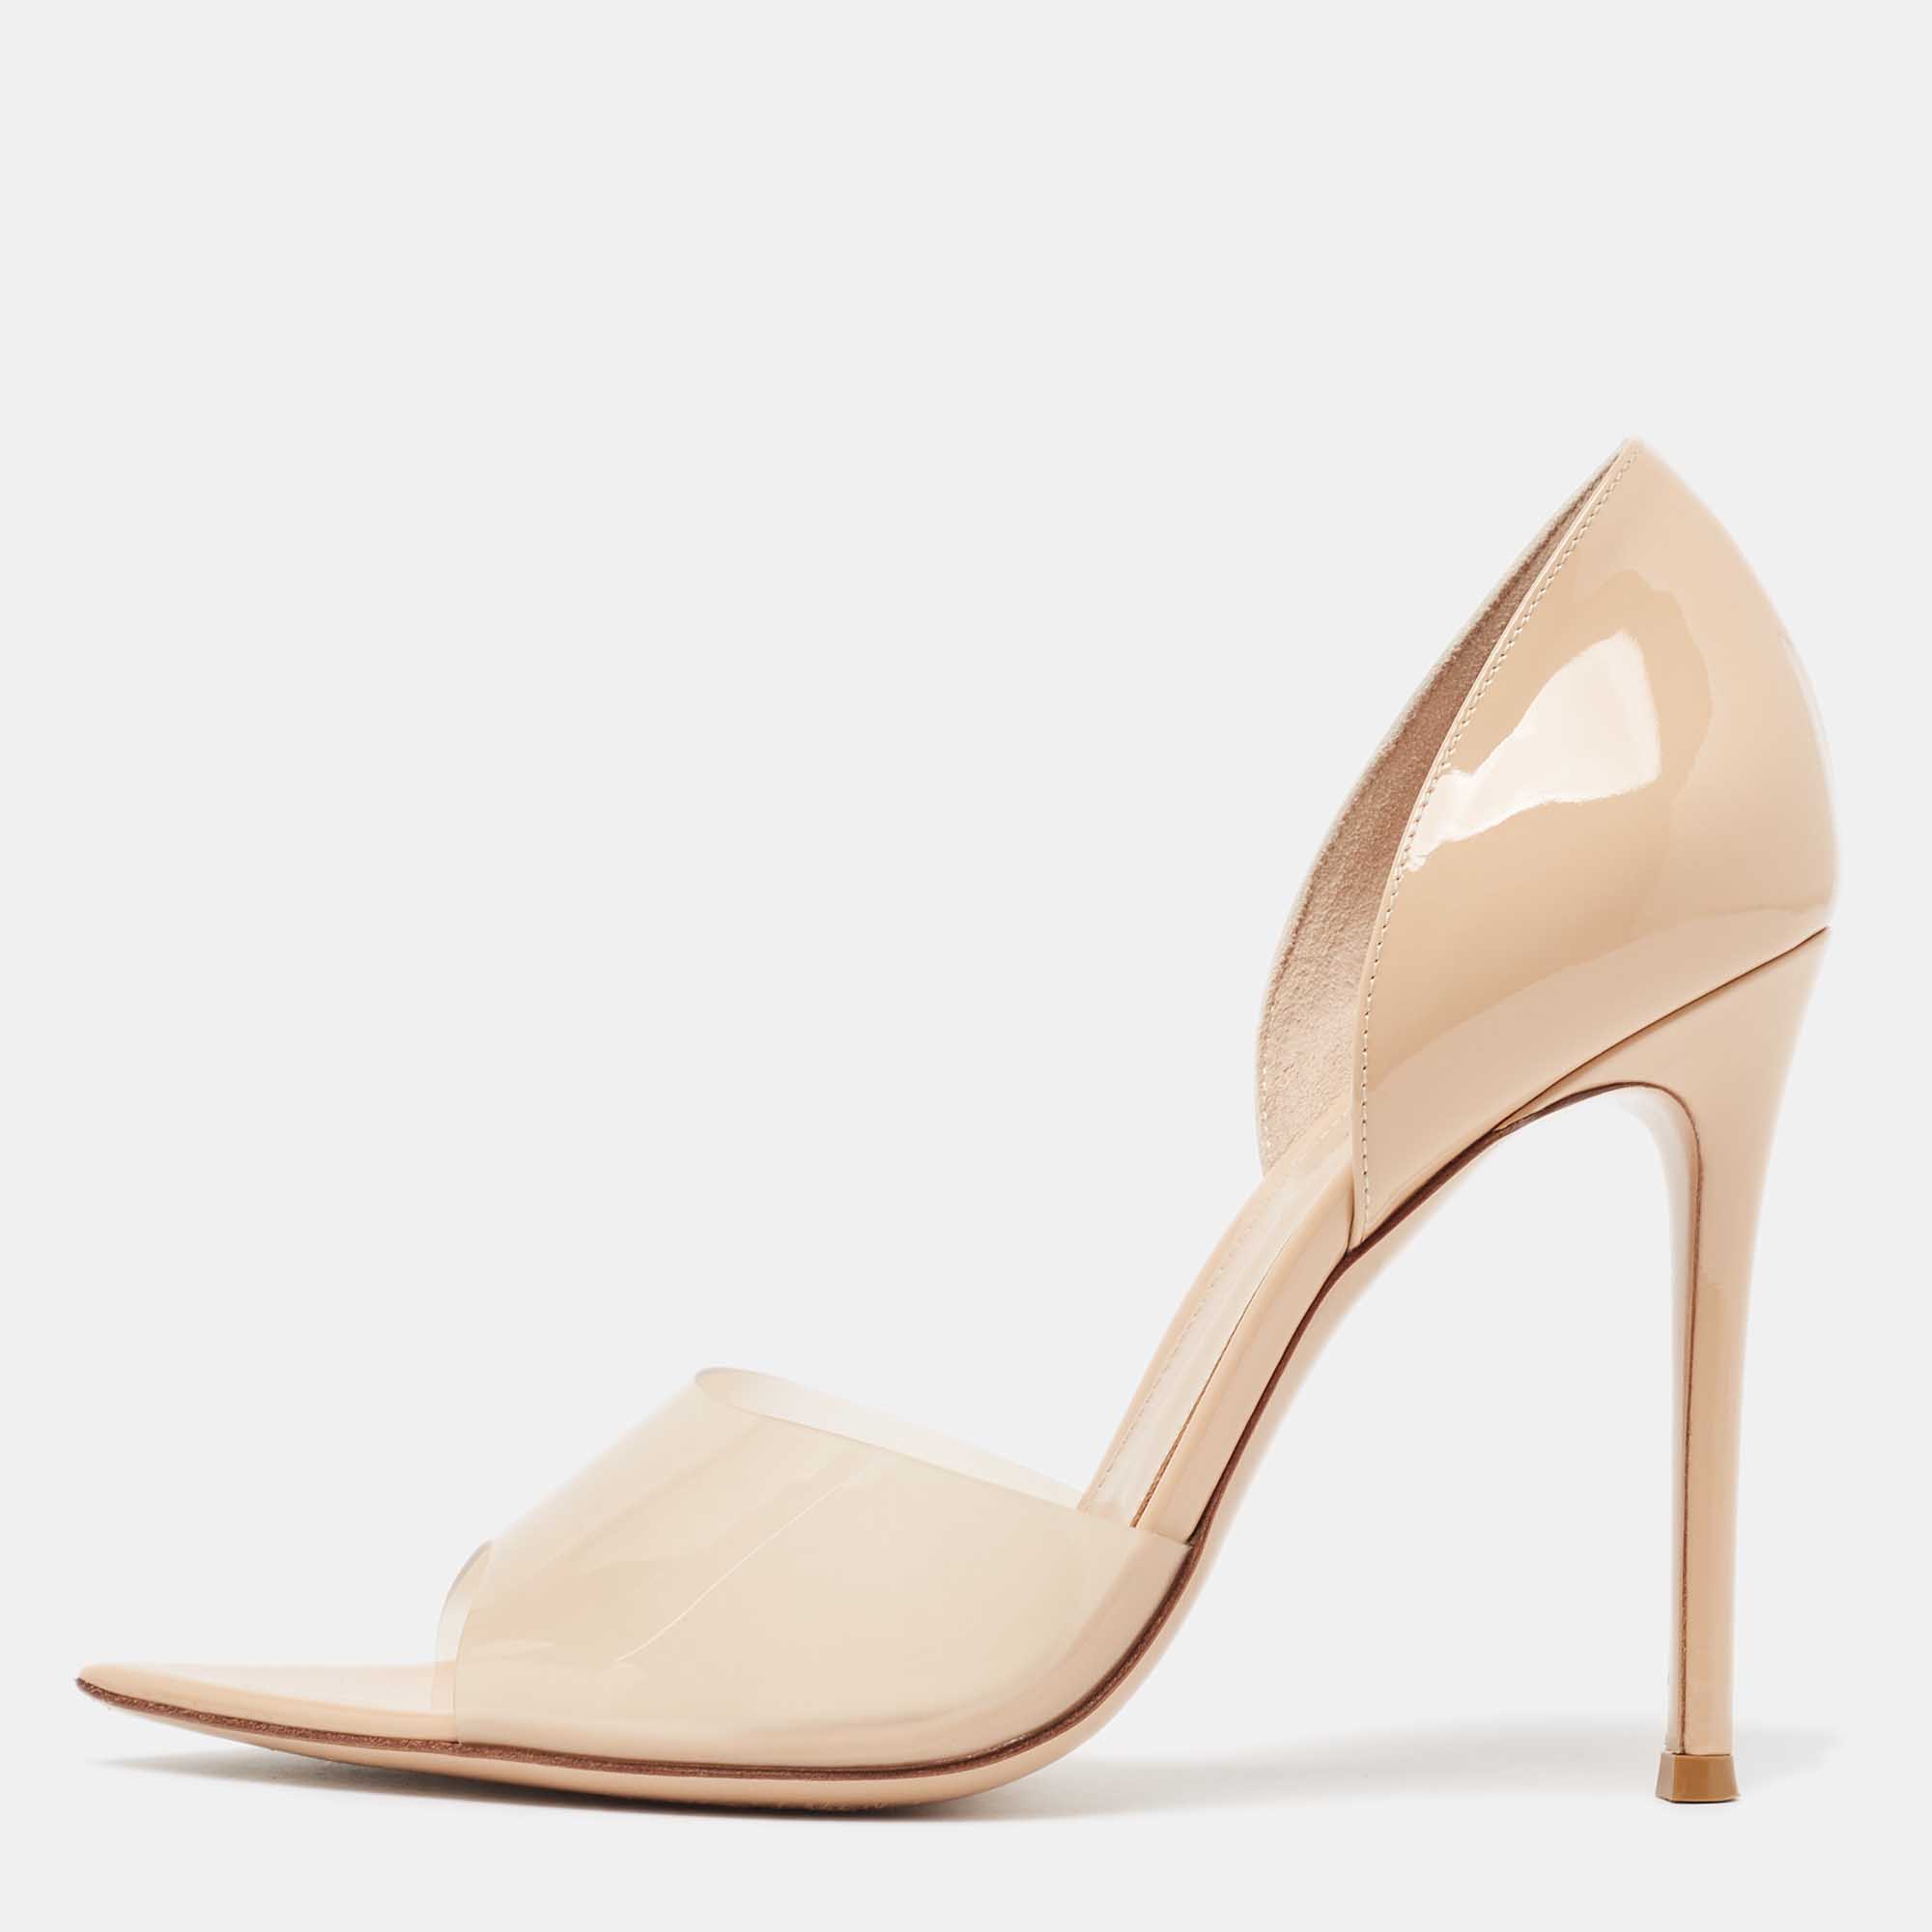 Gianvito rossi beige pvc and patent leather bree open toe pumps size 39